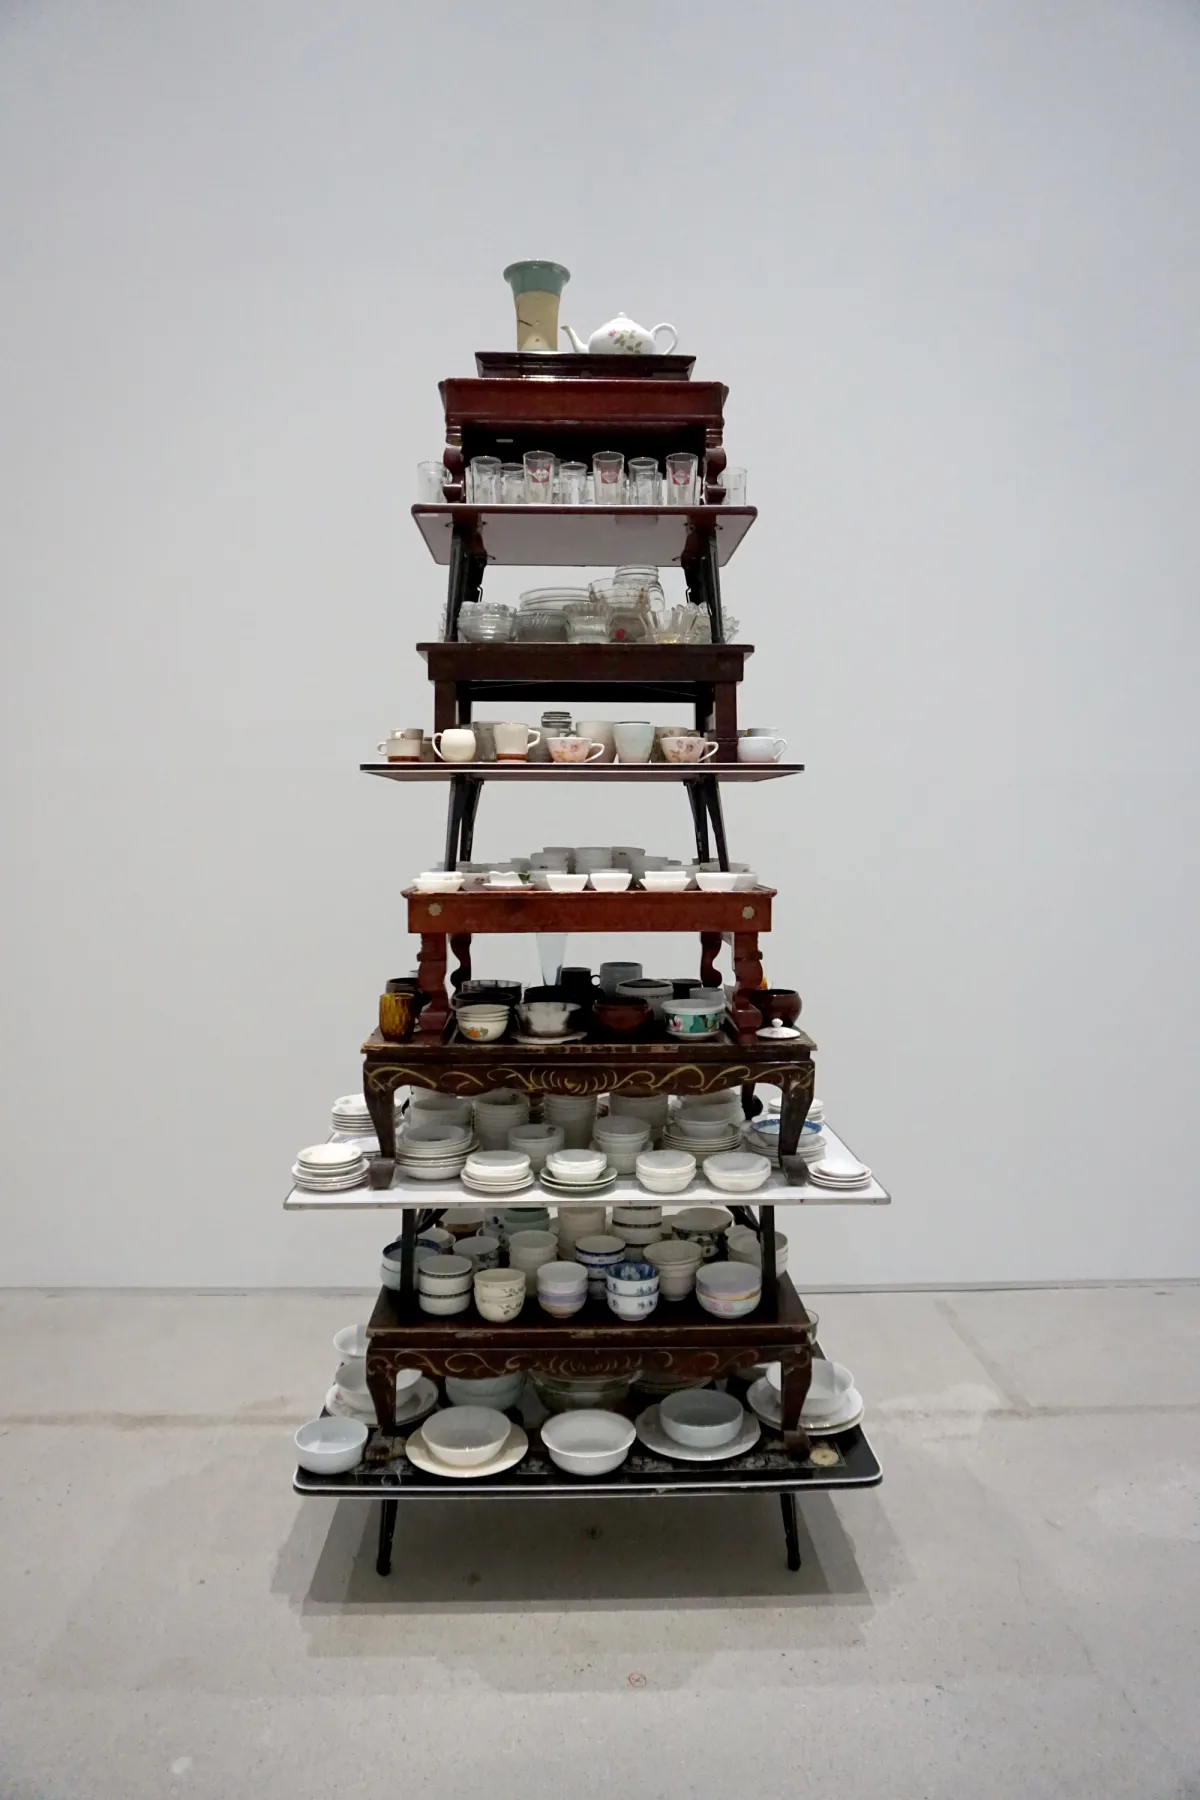 A unique piece of furniture constructed from tables stacked on each other, adorned with numerous stacked cups and saucers.